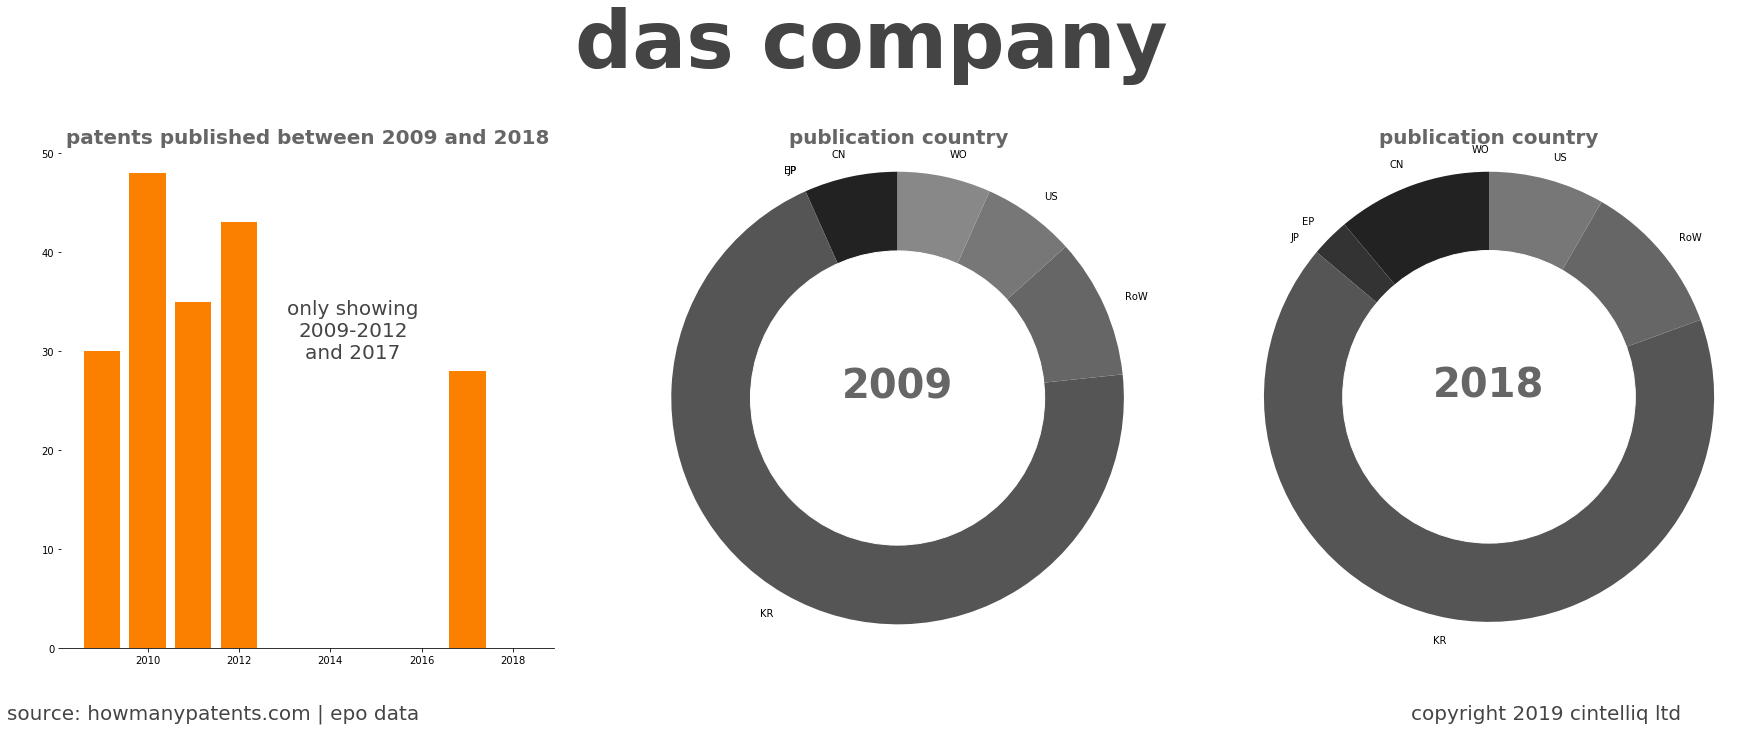 summary of patents for Das Company